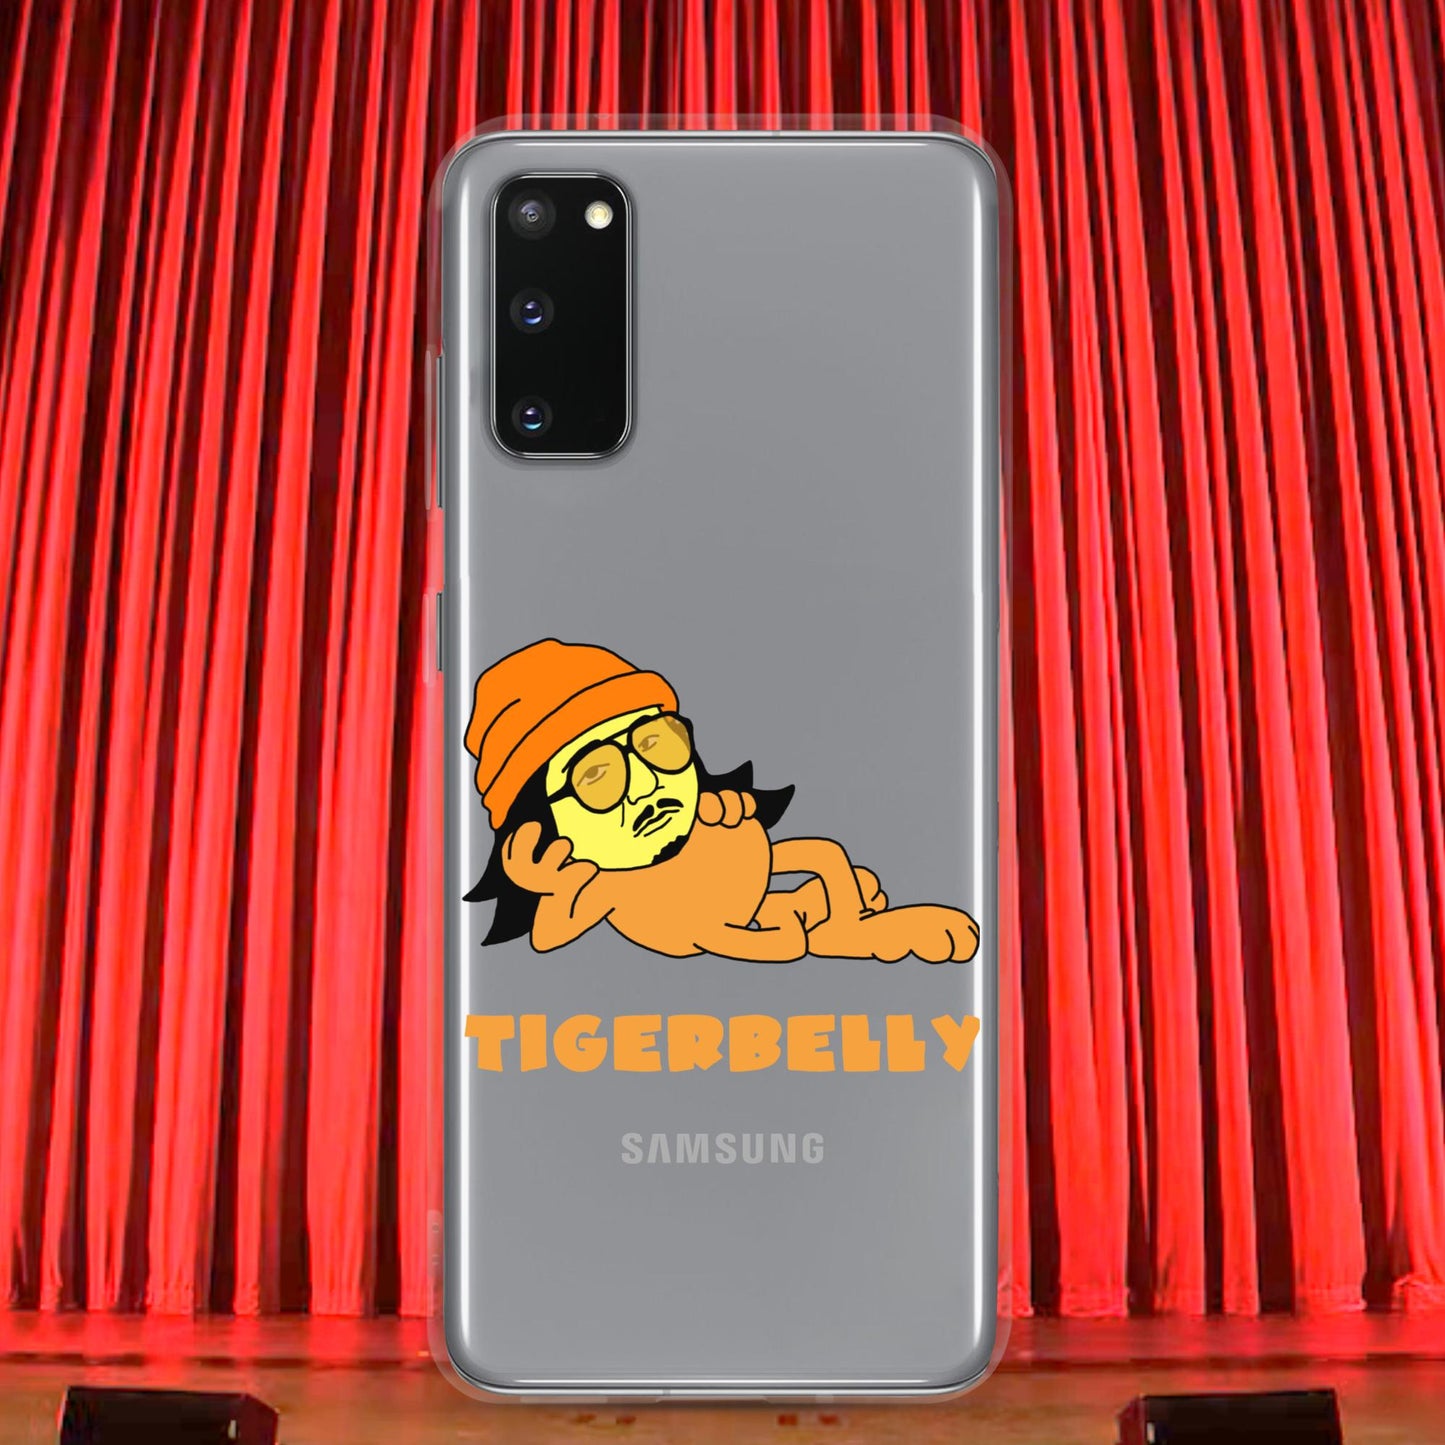 Bobby Lee Tigerbelly, Bobby Lee Merch, Tigerbelly Merch, Bobby Lee Gift, Funny Tigerbelly Gift, Tigerbelly Podcast, TigerBelly Clear Case for Samsung Next Cult Brand Bobby Lee, Podcasts, Stand-up Comedy, TigerBelly